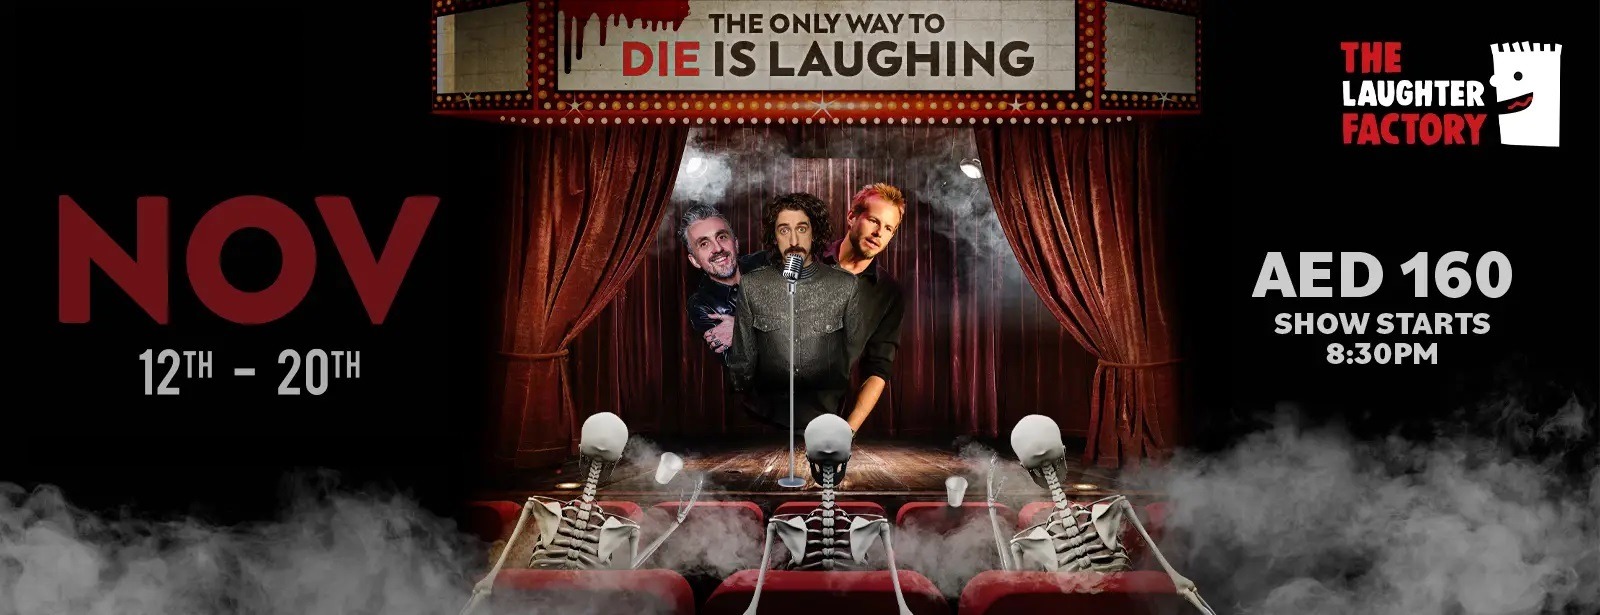 The Laughter Factory: The Only Way to Die, Is Laughing! - Coming Soon in UAE